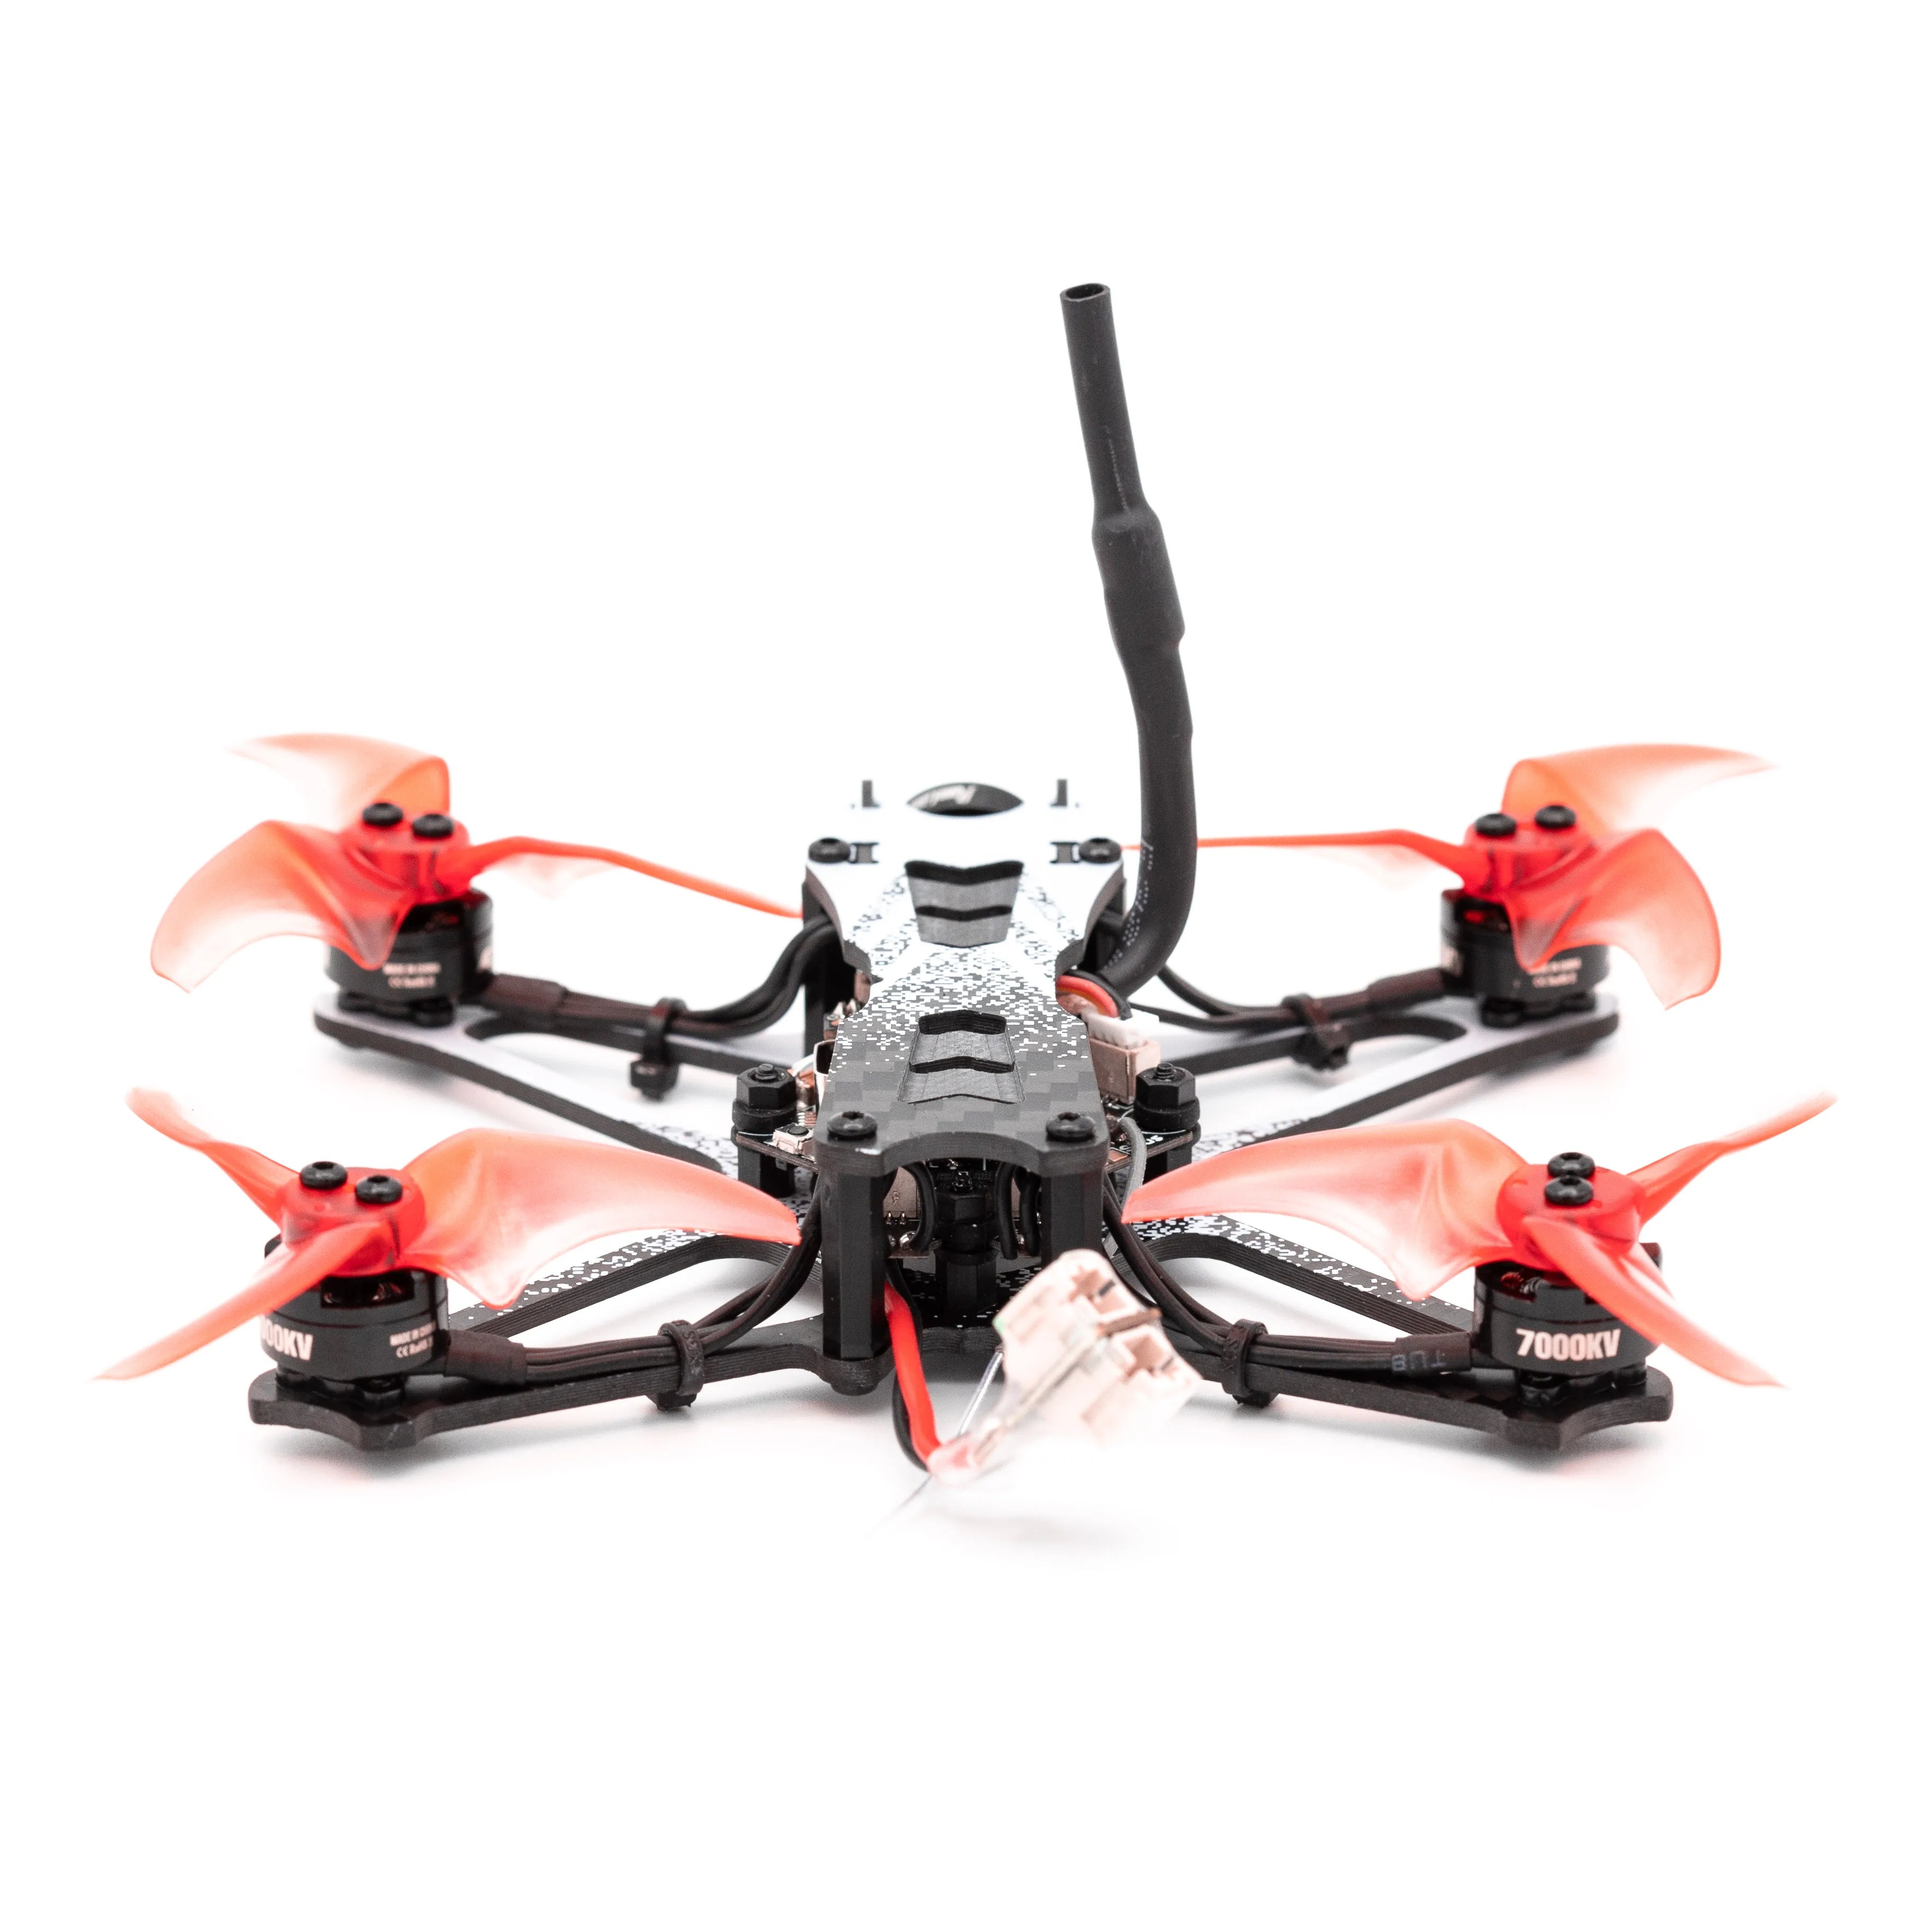 EMAX Tinyhawk Freestyle is designed to deliver an exhilarating flying